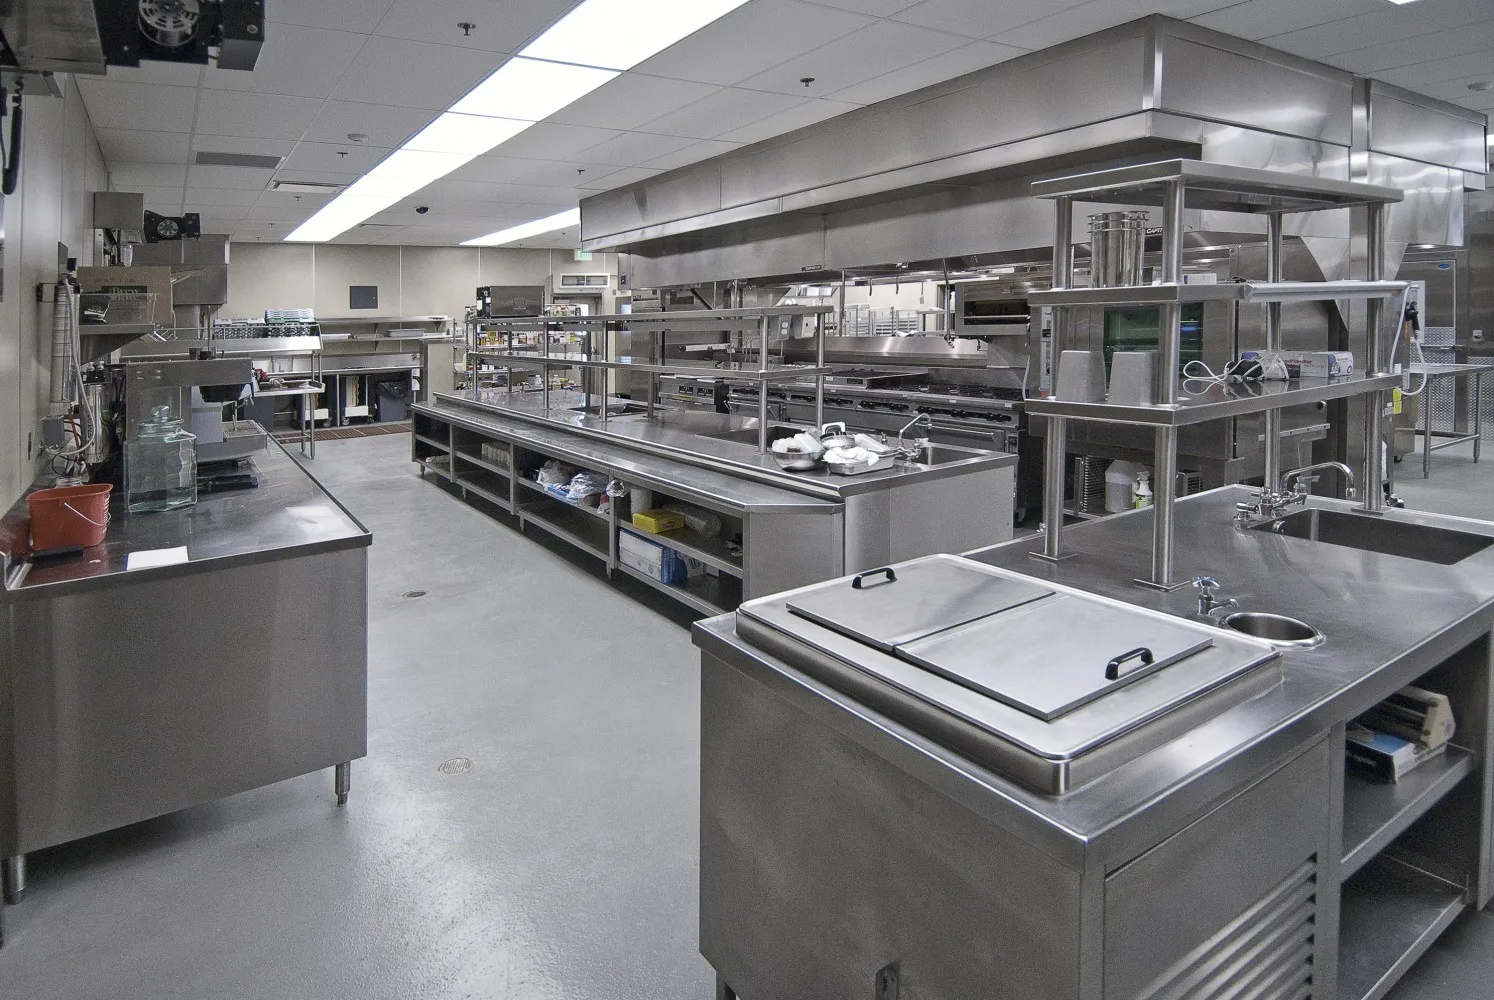 Whole set of commercial layout design hotel kitchen equipment for